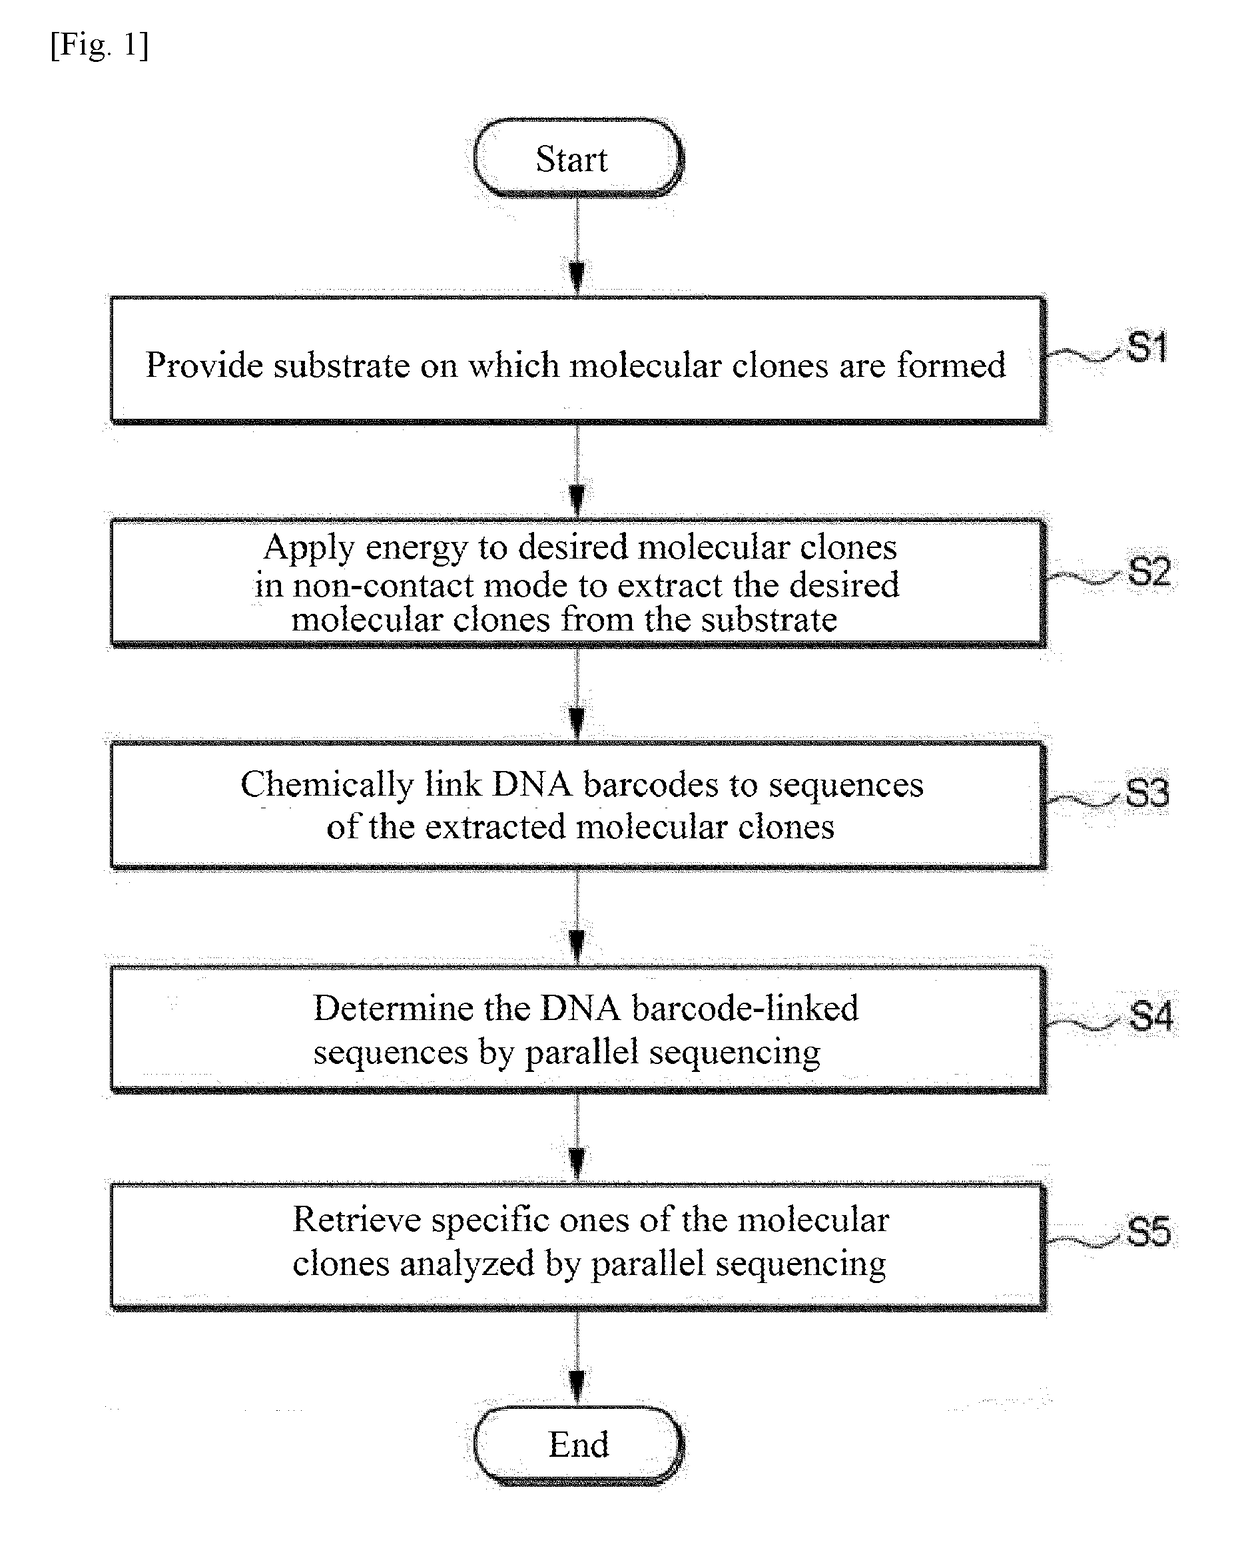 Method for extracting and characterizing molecular clones